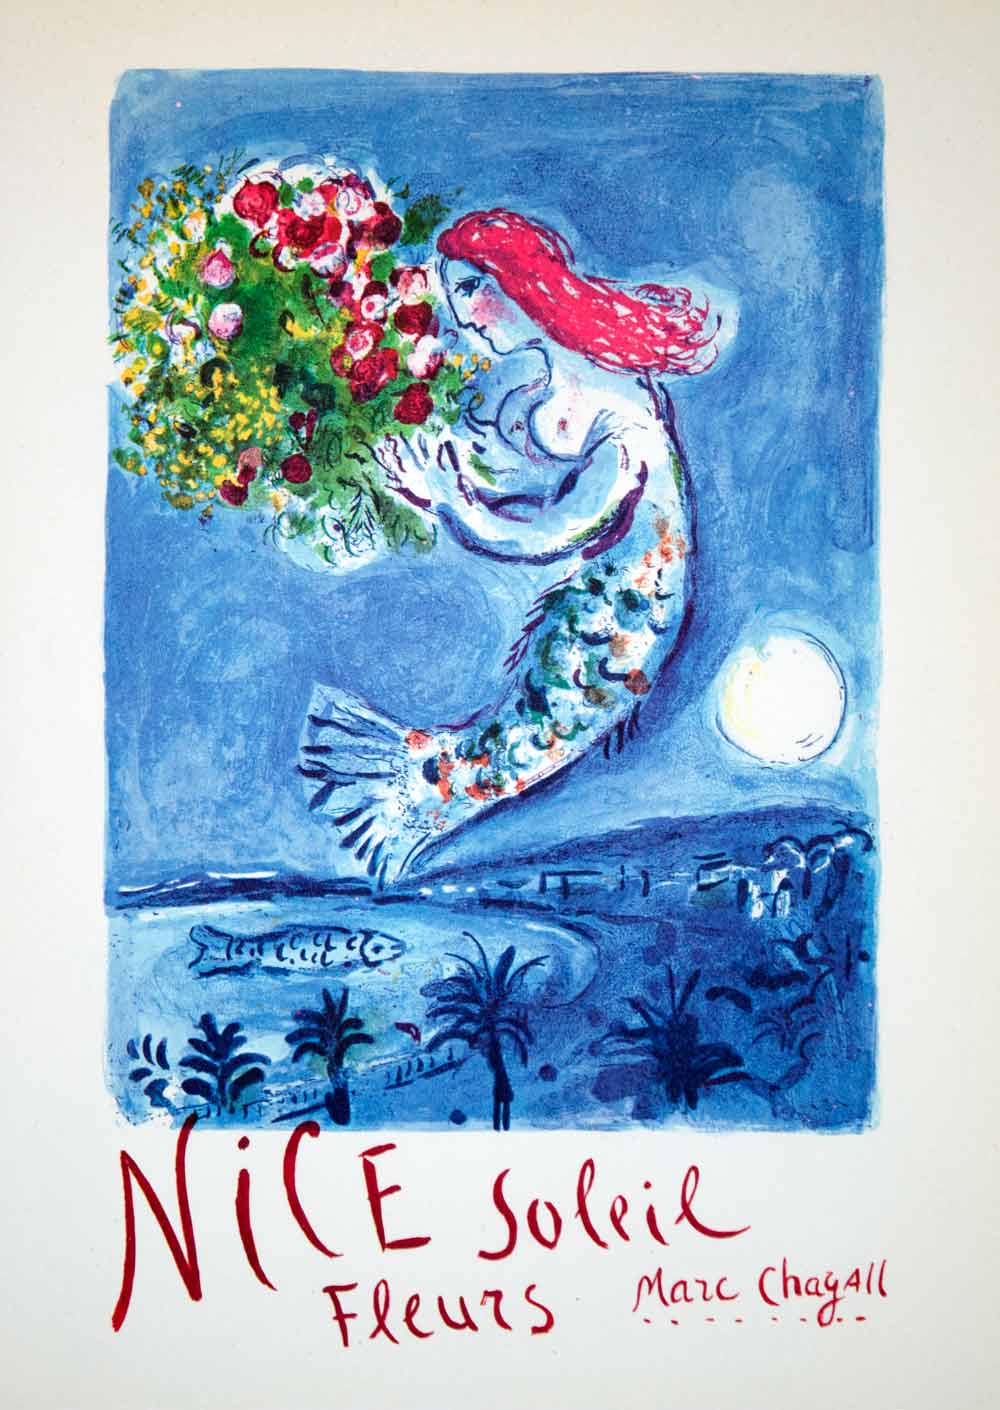 1966 Lithograph Marc Chagall Mermaid Nude Flowers Poster Art Nice Soleil Fleurs